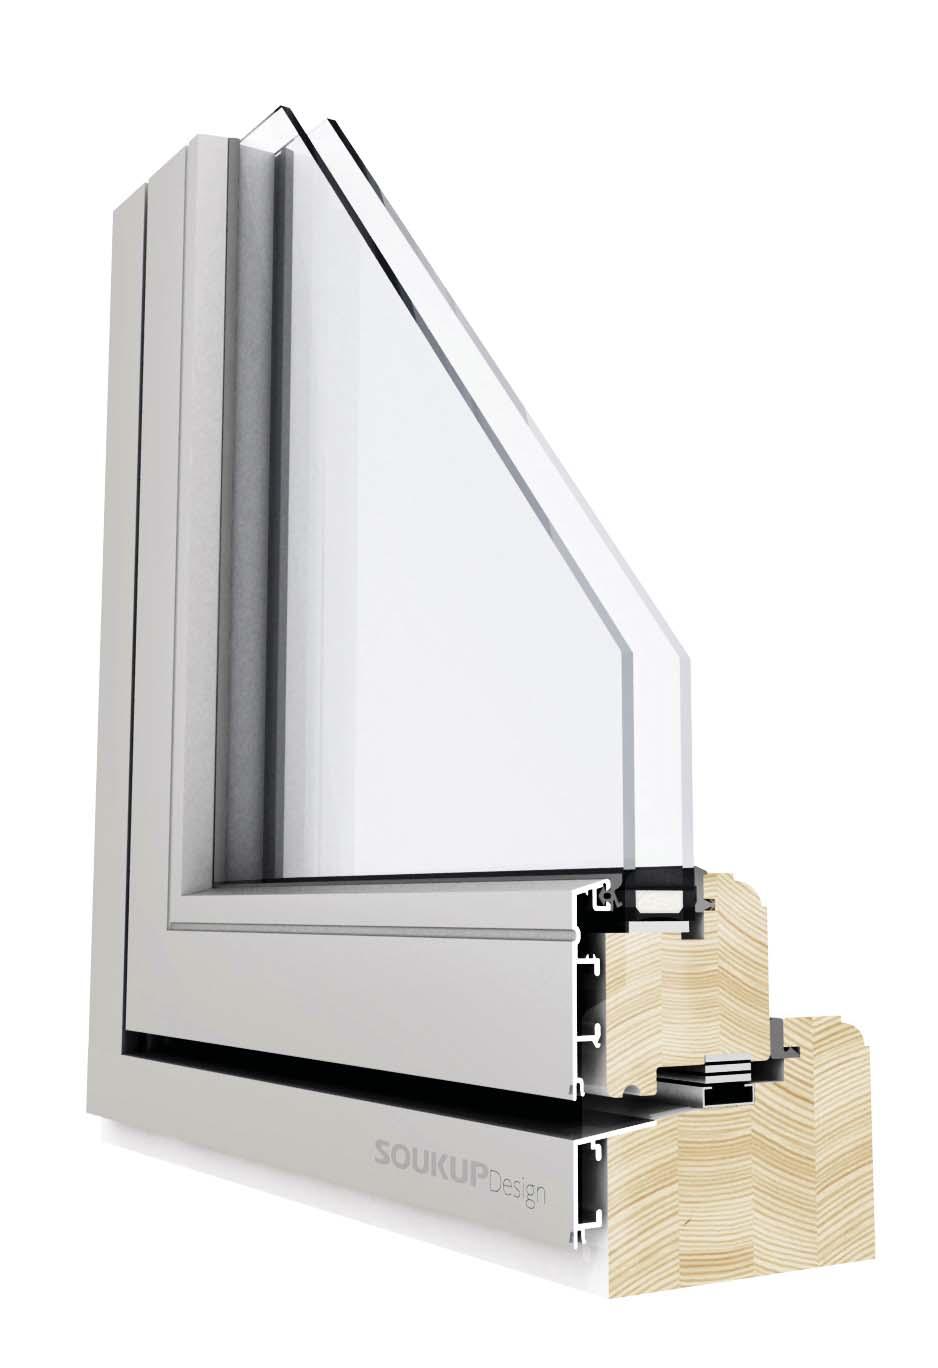 Alu-Clad windows for the United Kingdom Examples of